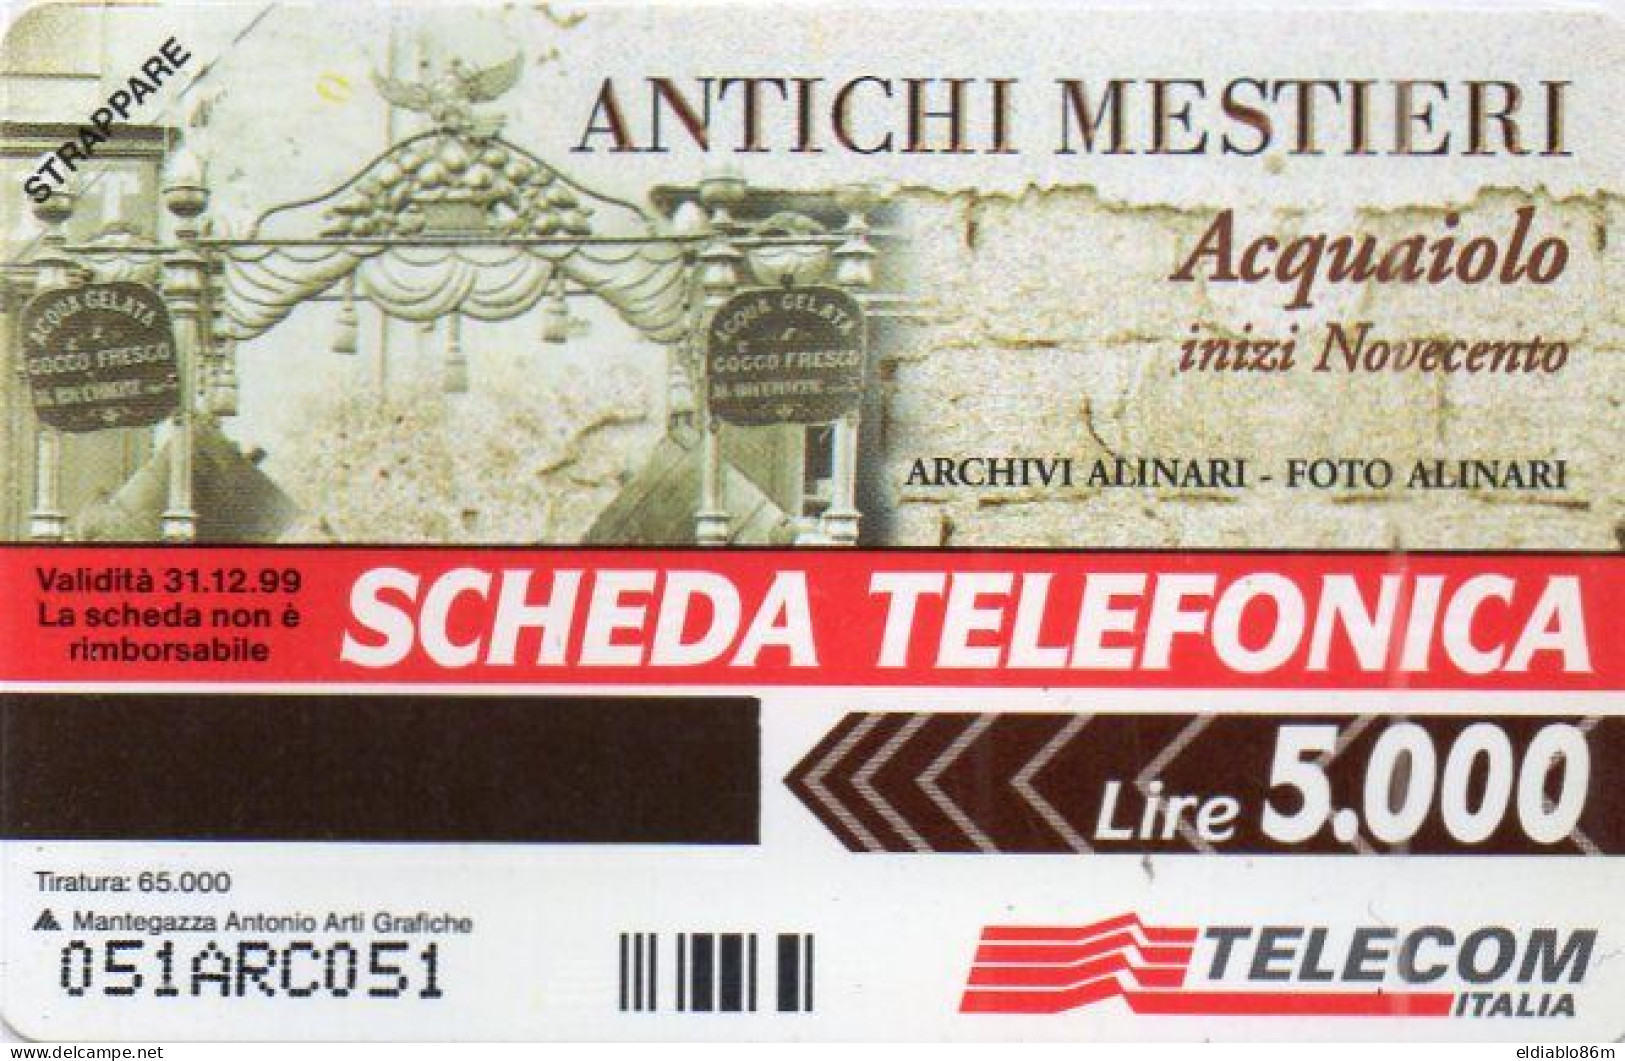 ITALY - URMET - ARC CARD (FOR INTERNAL TELECOM ARCHIVES) - SEE BATCH NUMBER - 200ex - MINT - Tests & Diensten